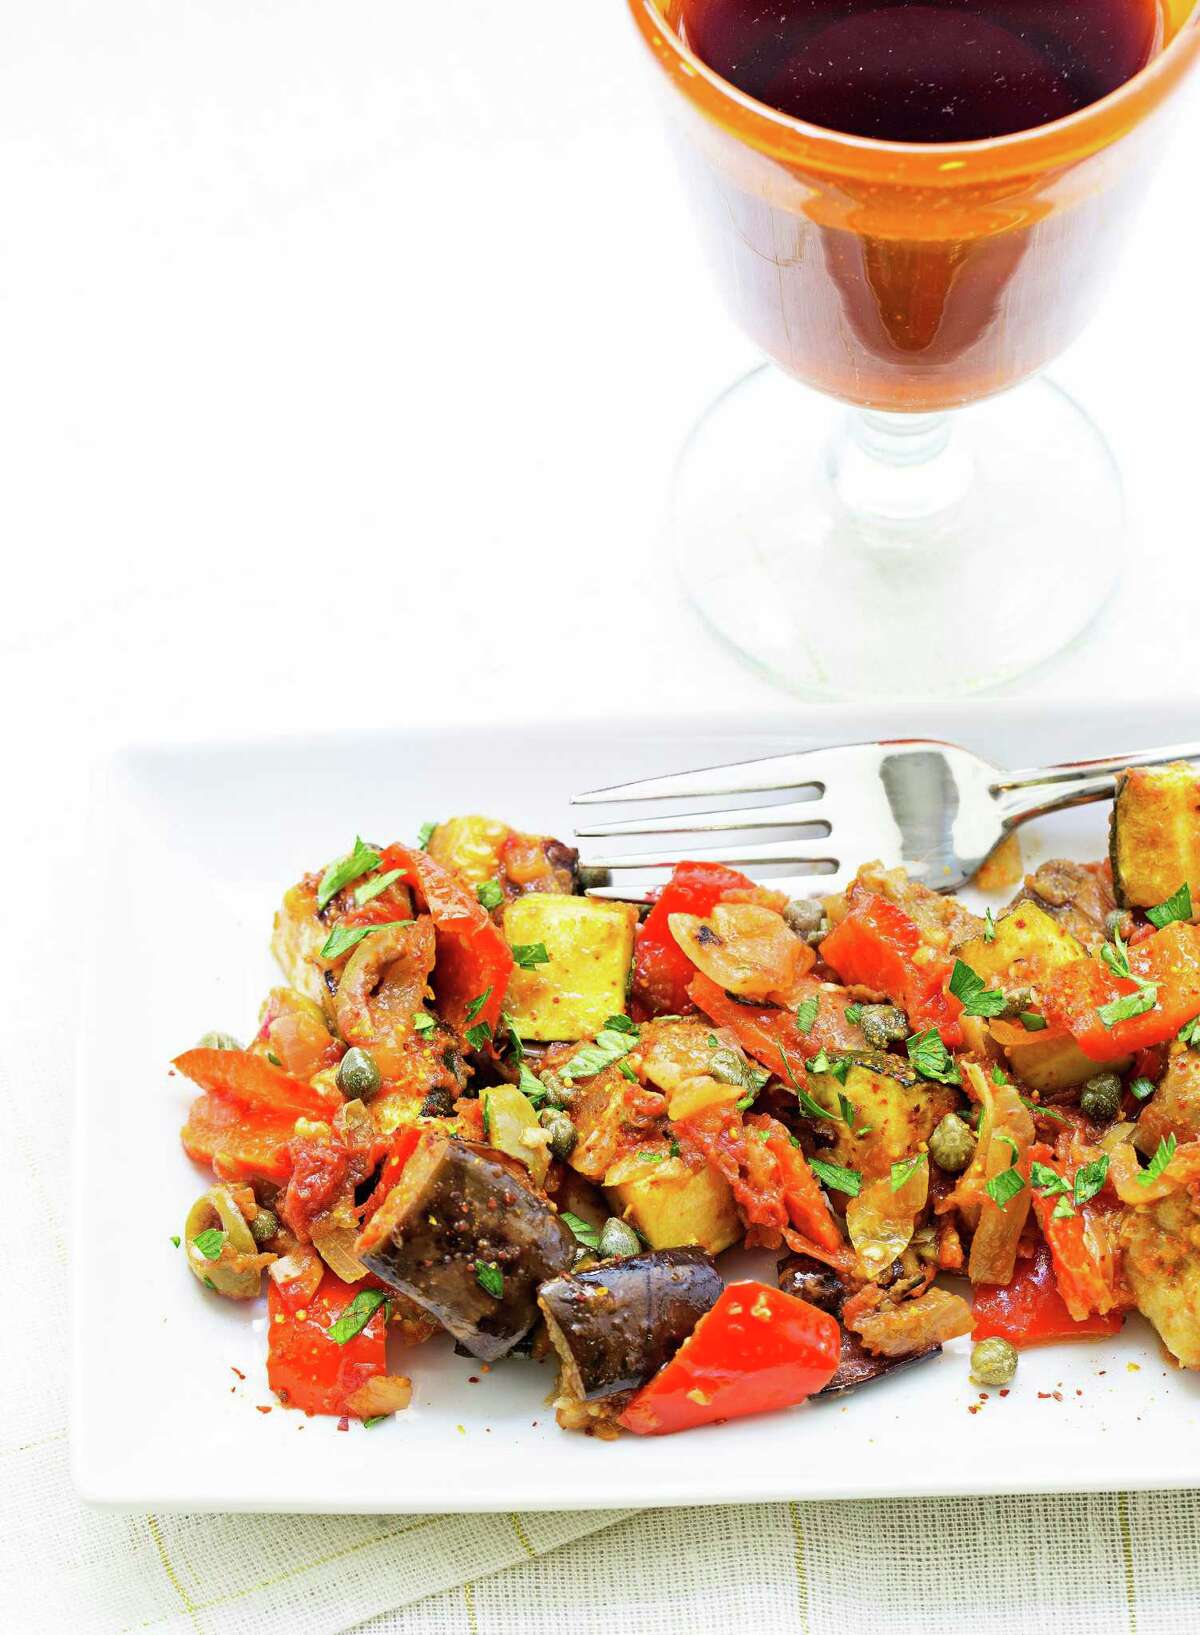 Ratatouille is considered a French vegetable stew, but it just might be the perfect dish for Houston's hot summers.